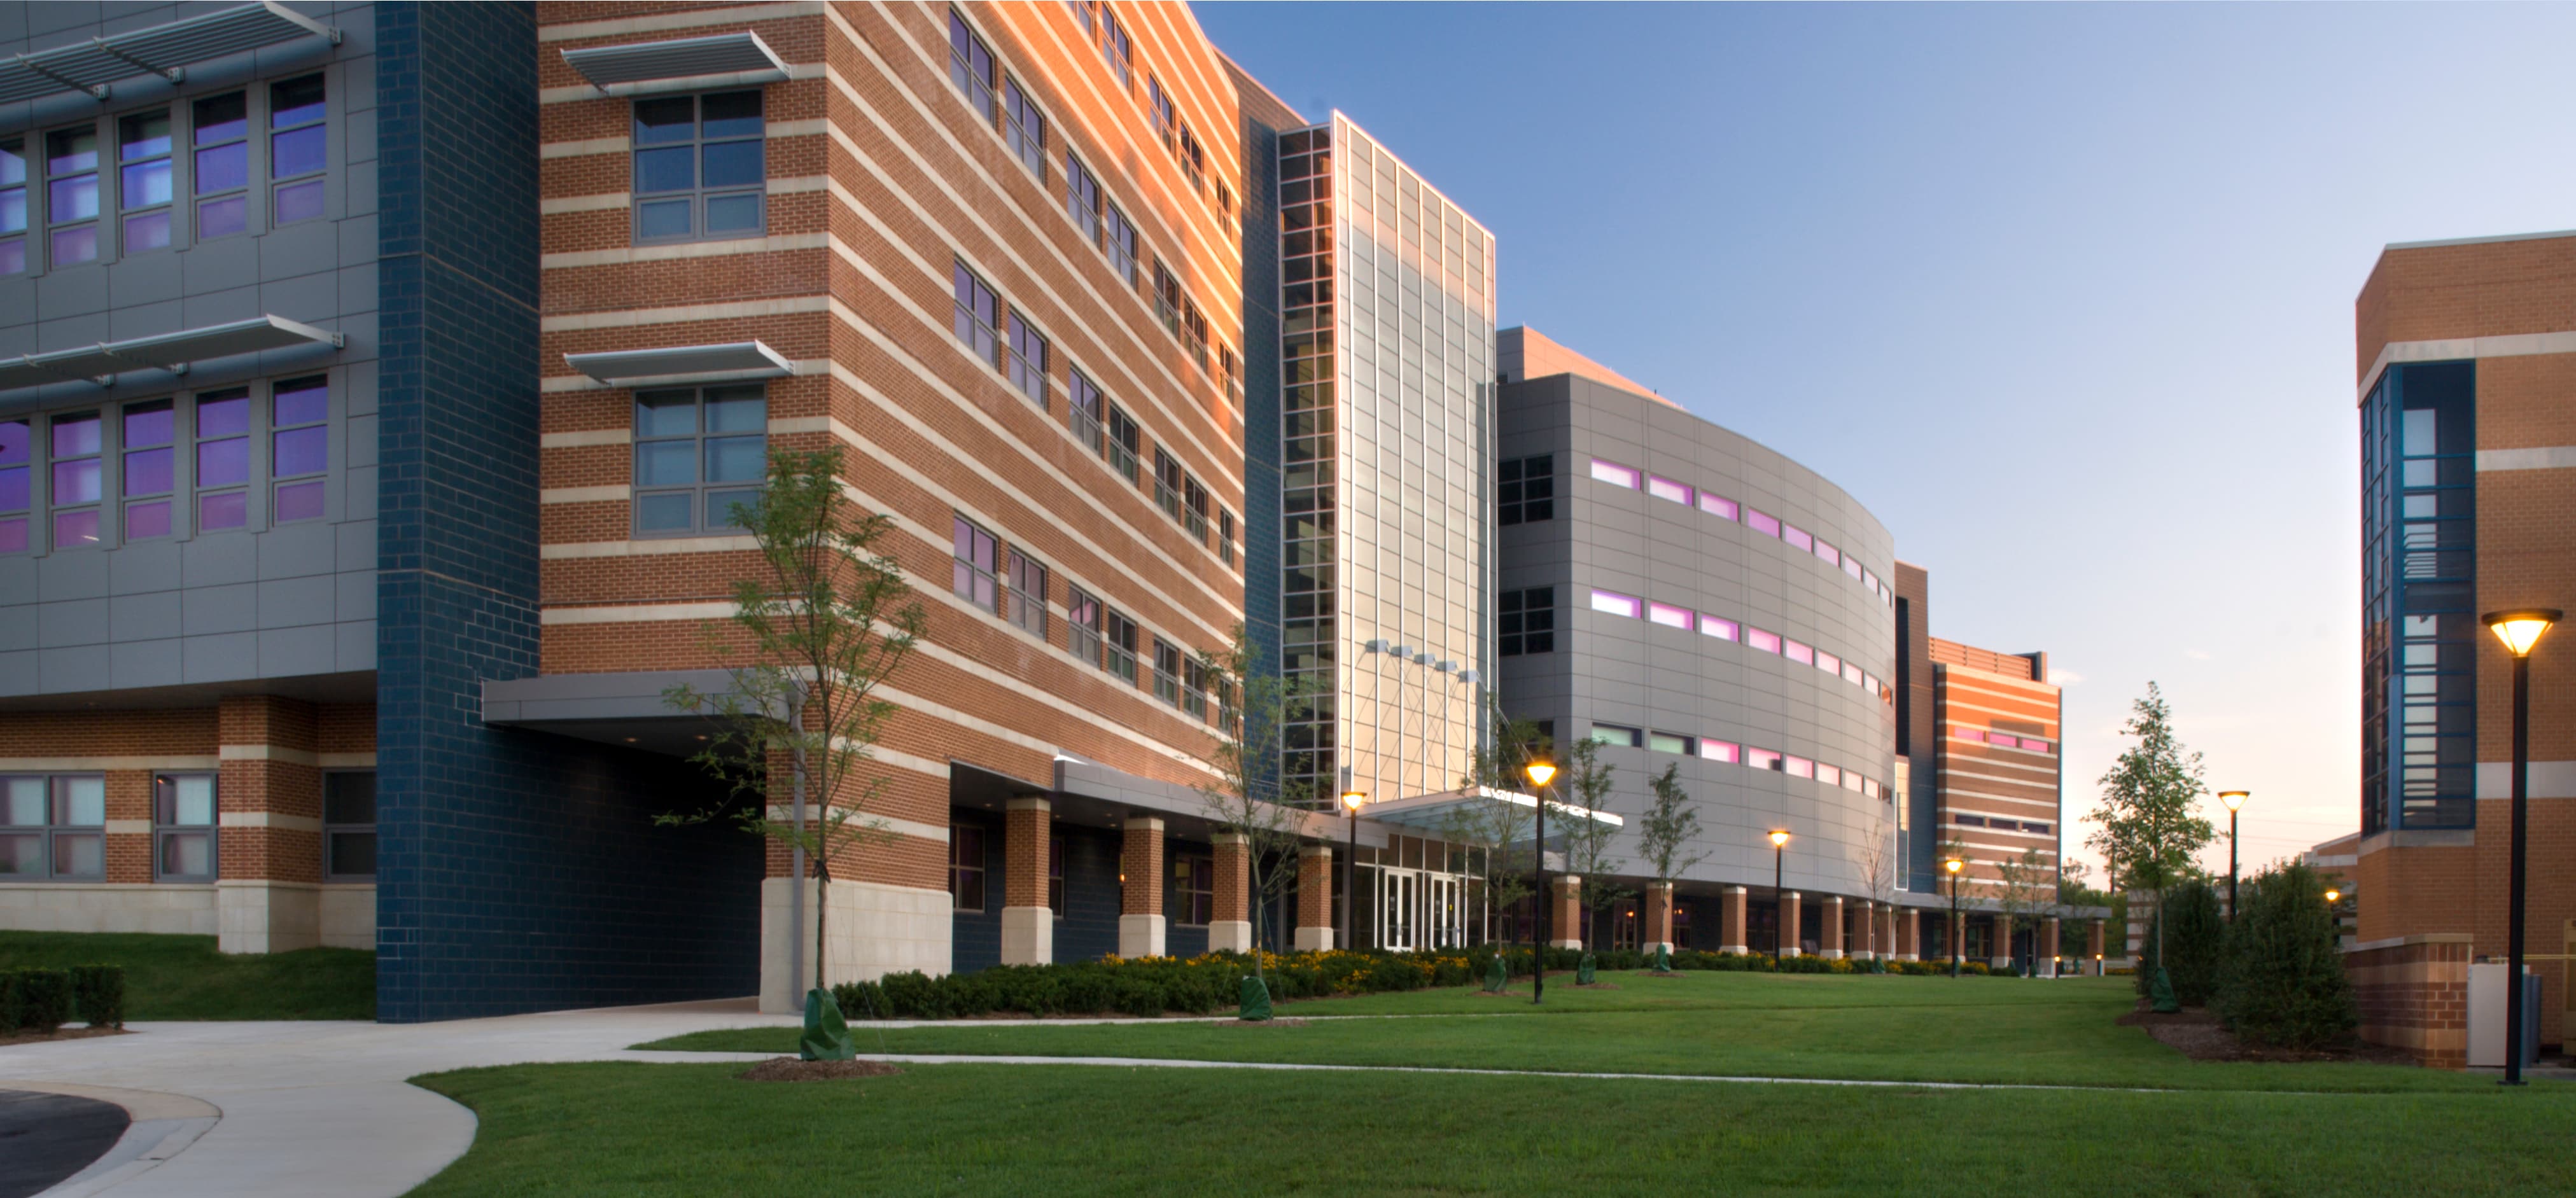 Brick and glass buildings on the Shady Grove campus